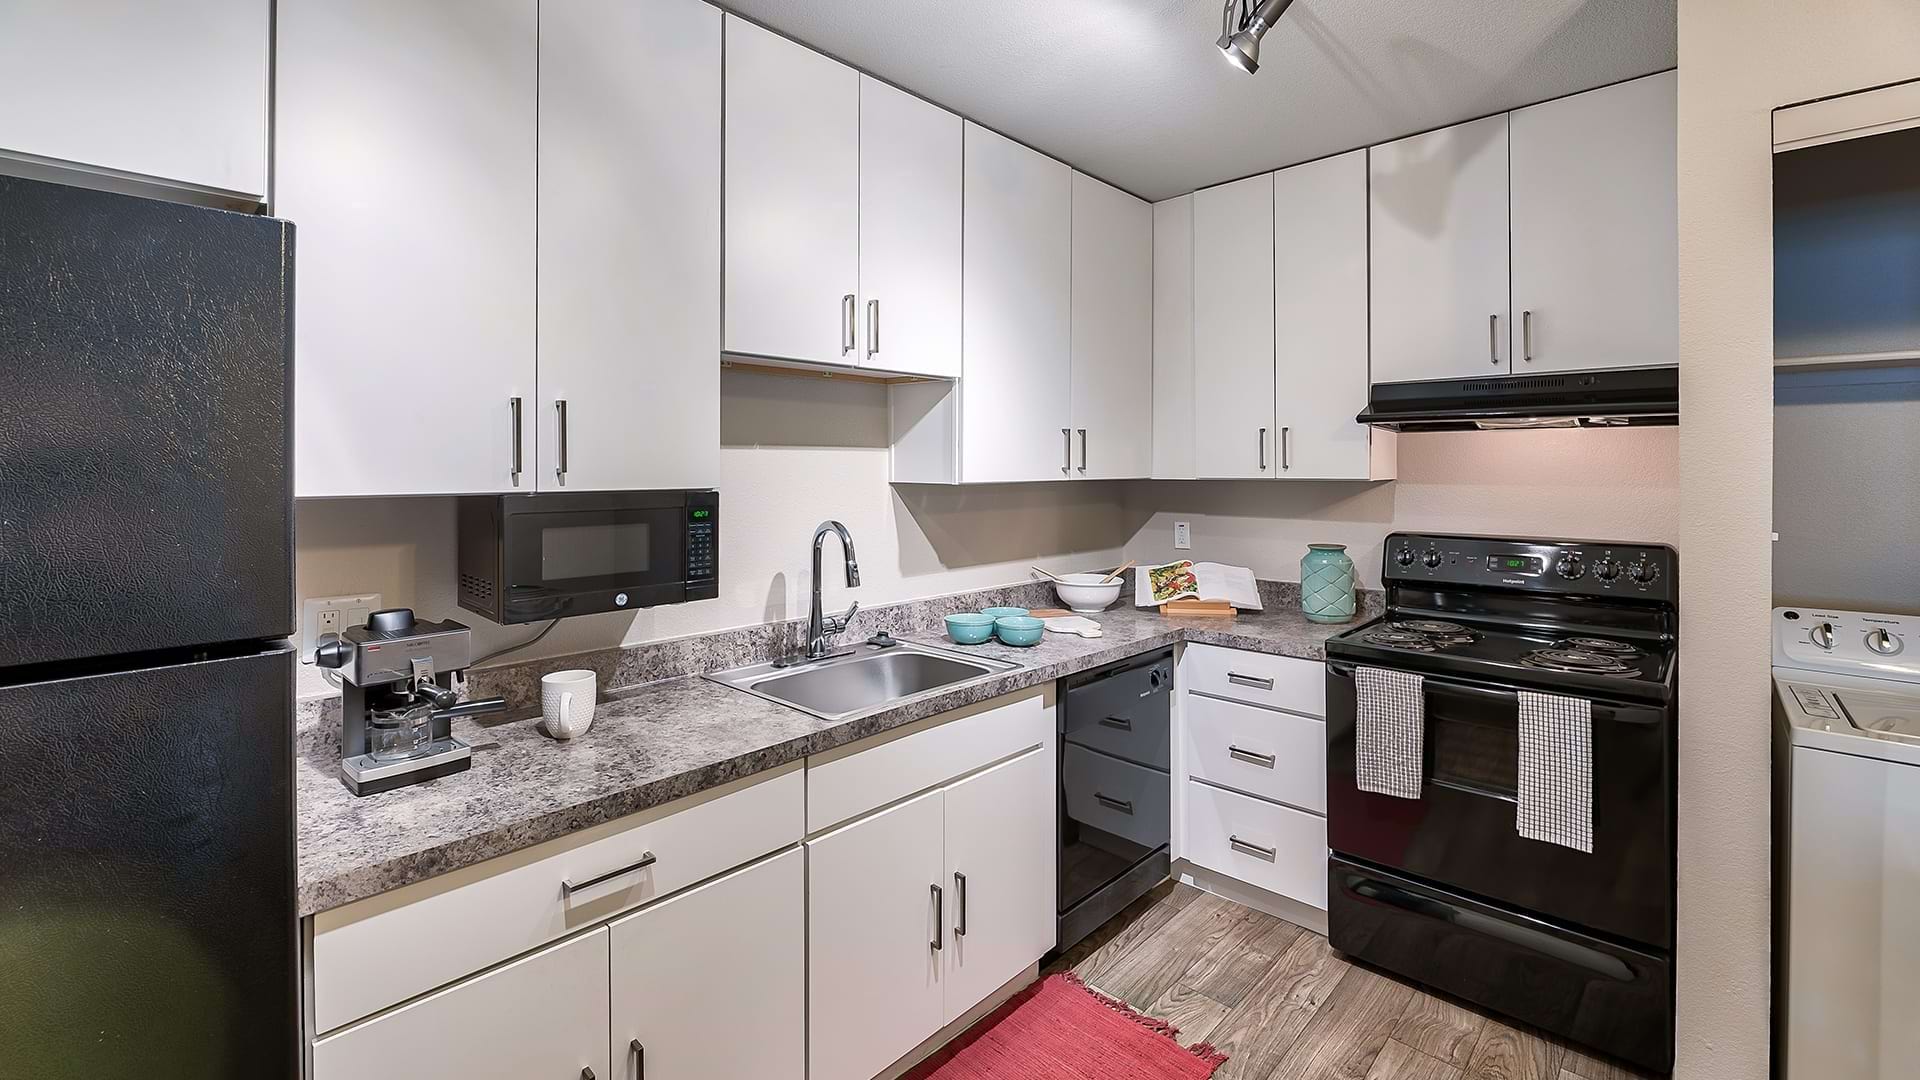 Kitchen with Granite-Style Countertops at Our Gilbert Apartments for Rent